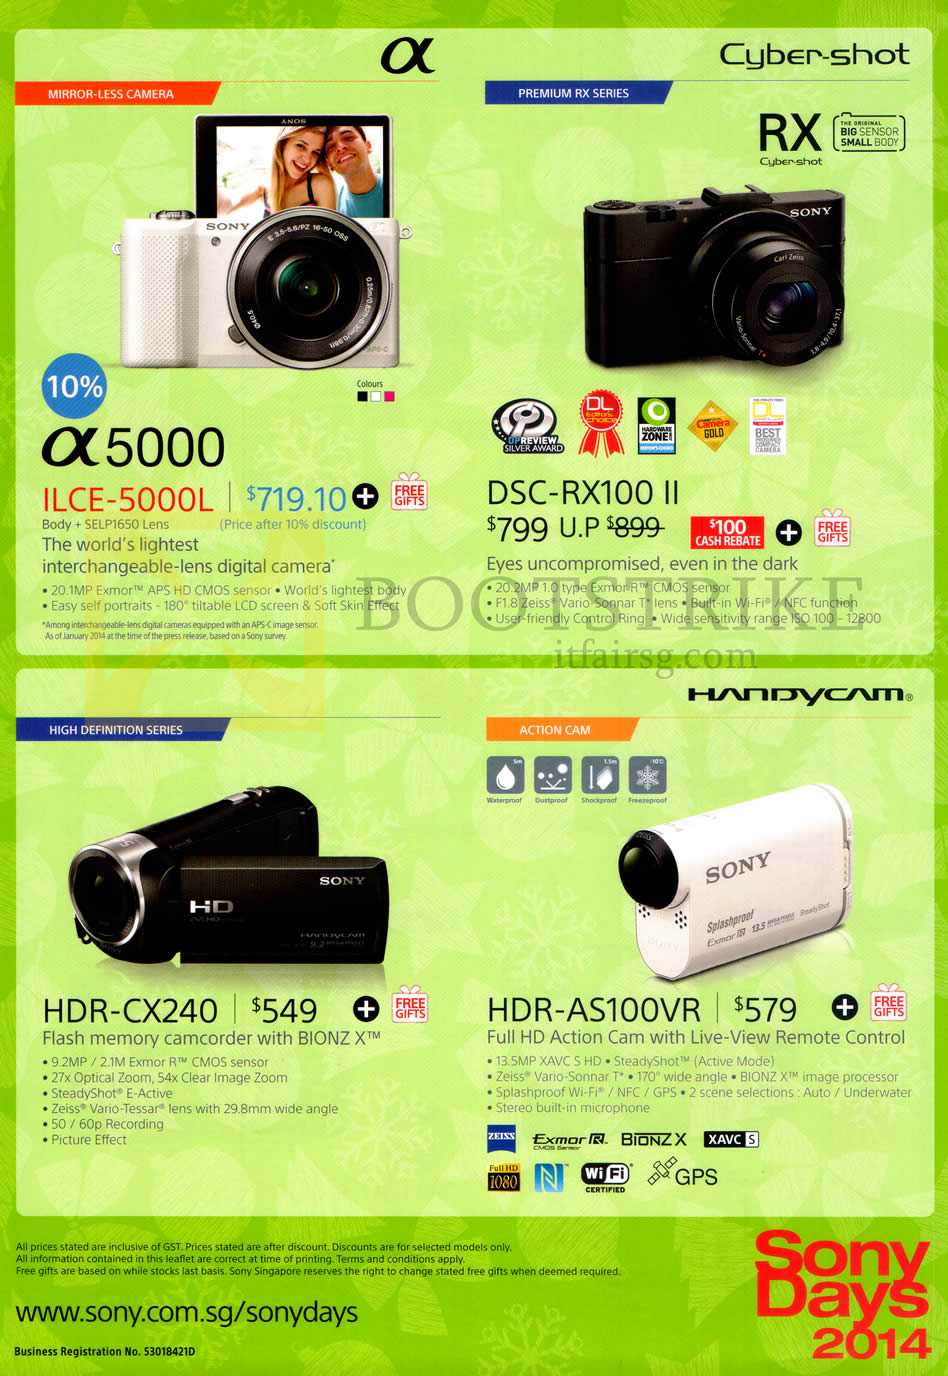 SITEX 2014 price list image brochure of Sony Digital Cameras, Camcorders, A5000, DSC-RZ100 II, HDR-CX240, AS100VR